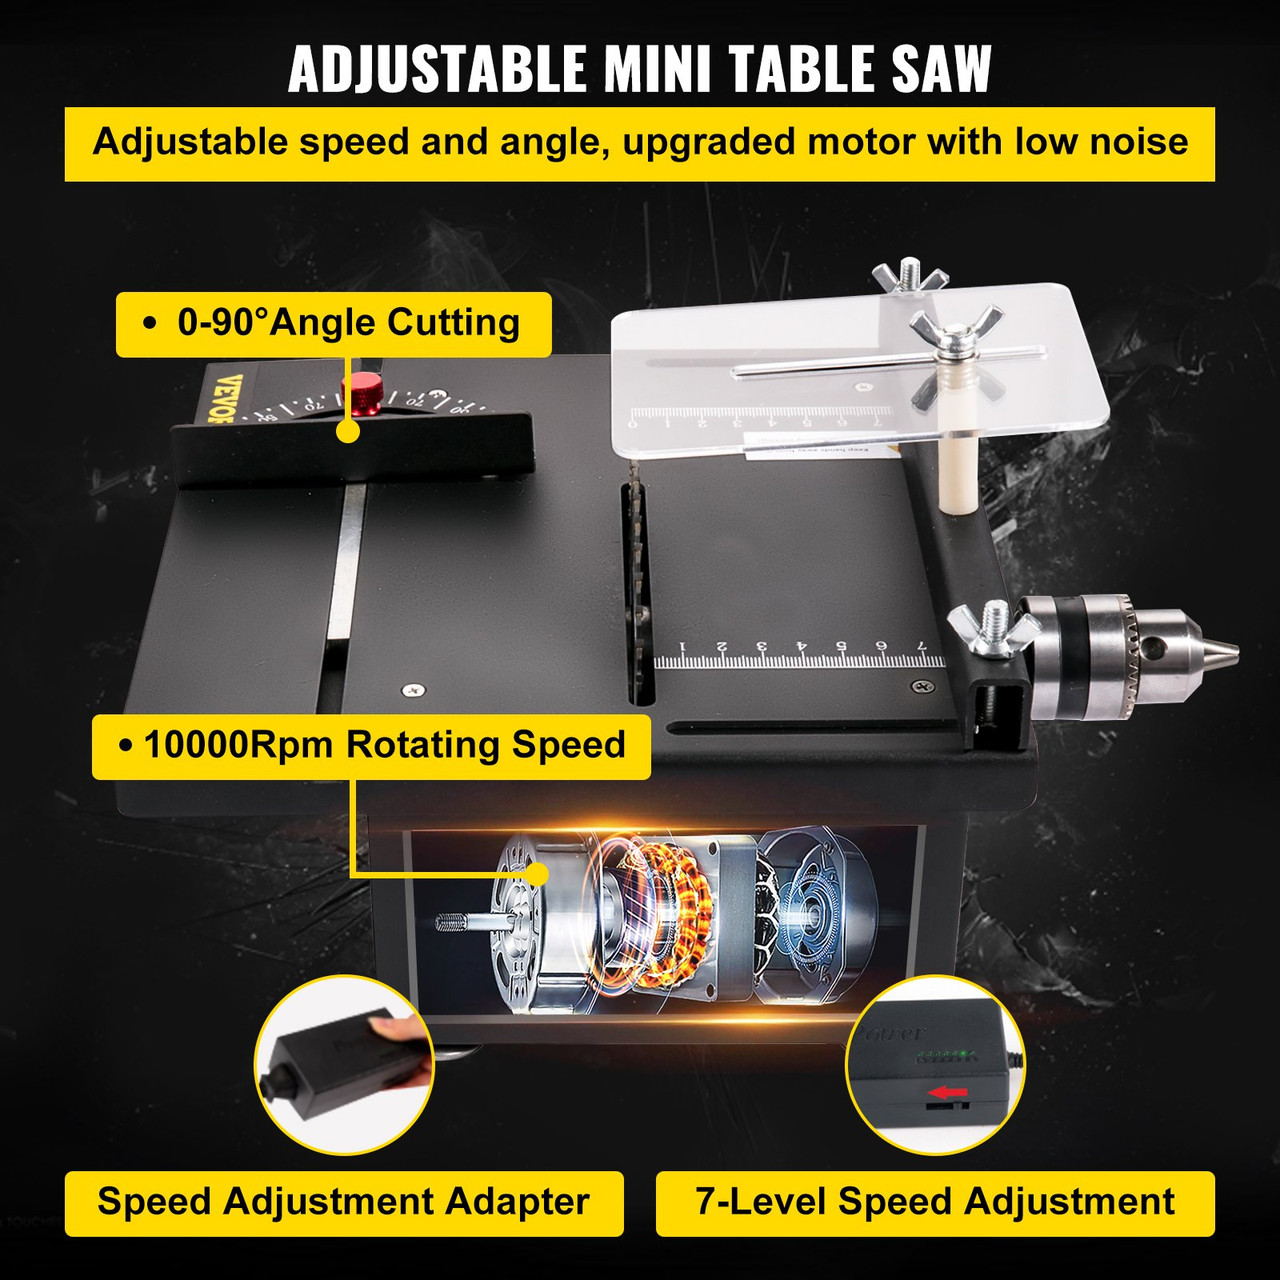 Mini Table Saw, 96W Hobby Table Saw for Woodworking, 0-90 Angle Cutting Portable DIY Saw, 7-Level Speed Adjustable Multifunctional Table Saws, 1.3in Cutting Depth (Cutting/Polishing Set)